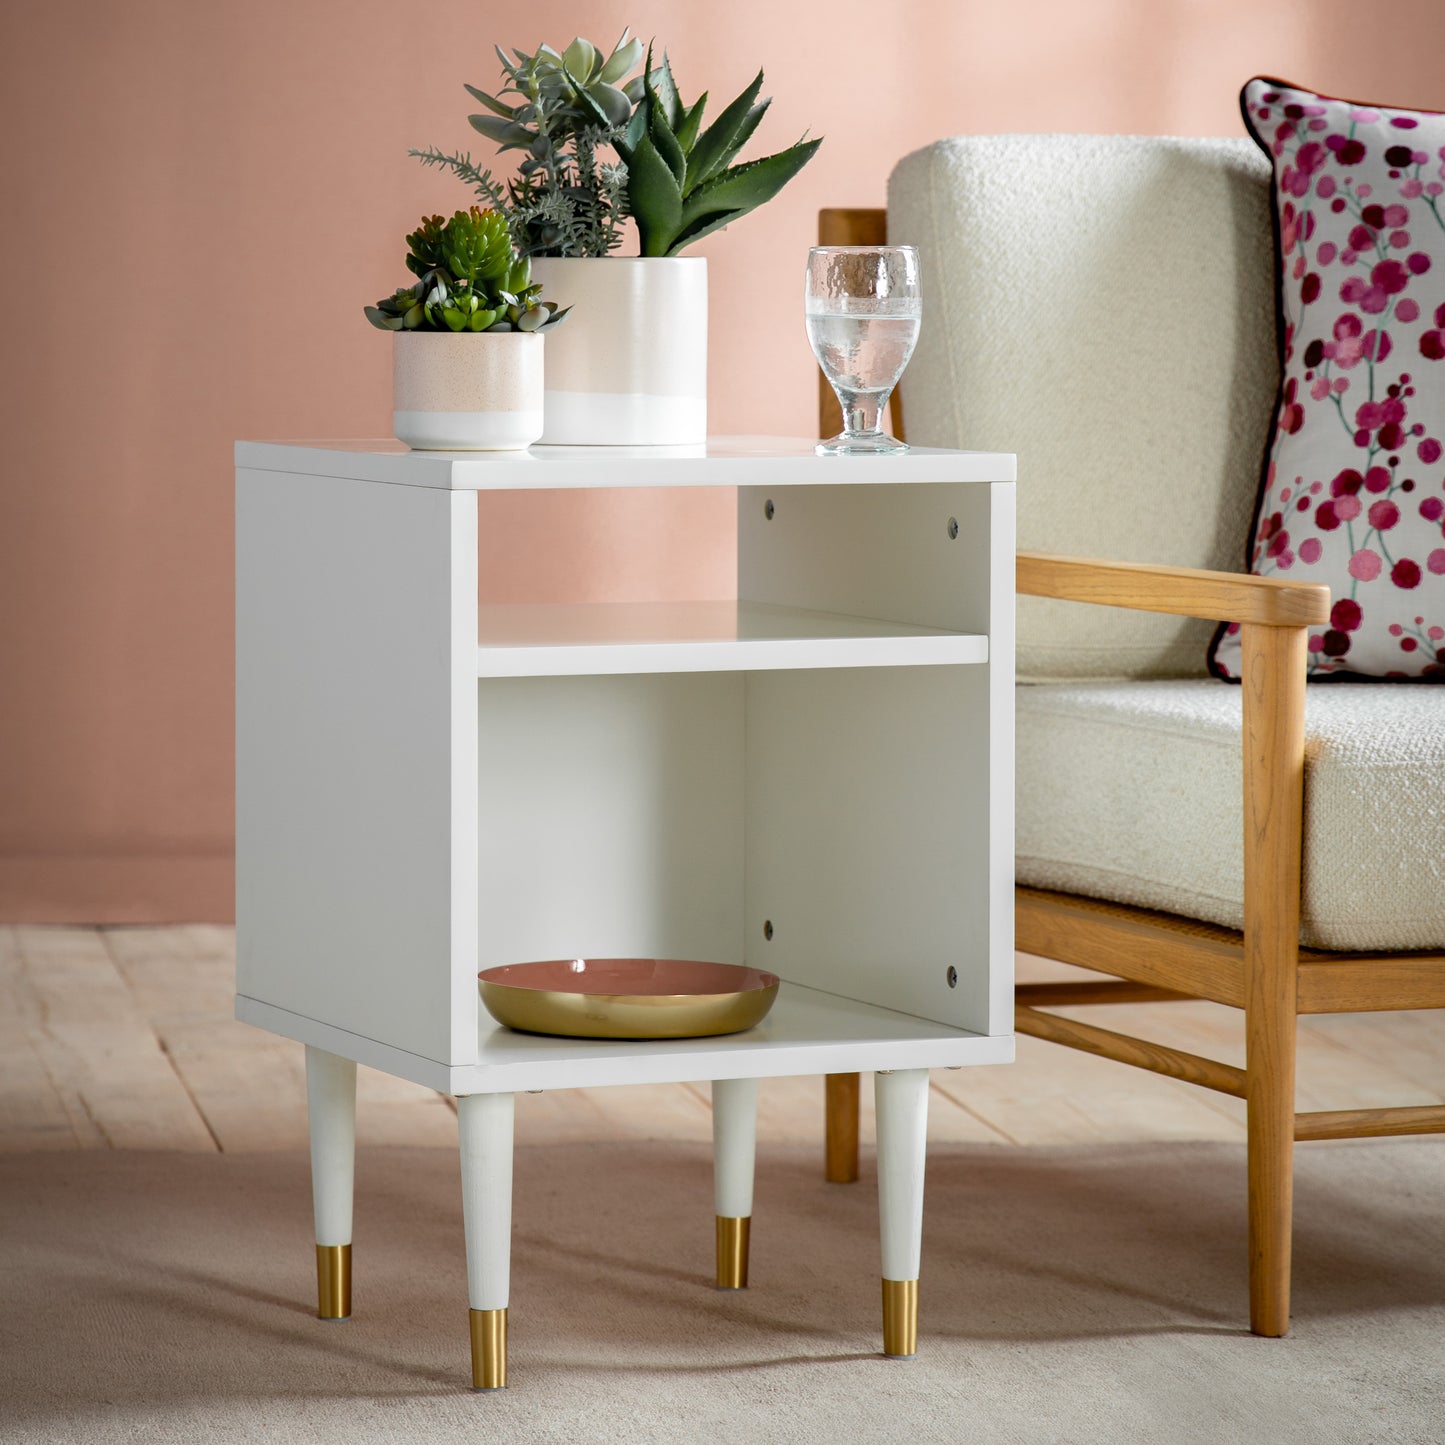 Interior decor: A Thurlestone Side Table White 400x400x600mm from Kikiathome.co.uk adds a stylish touch to any interior space, complemented by a chair and a